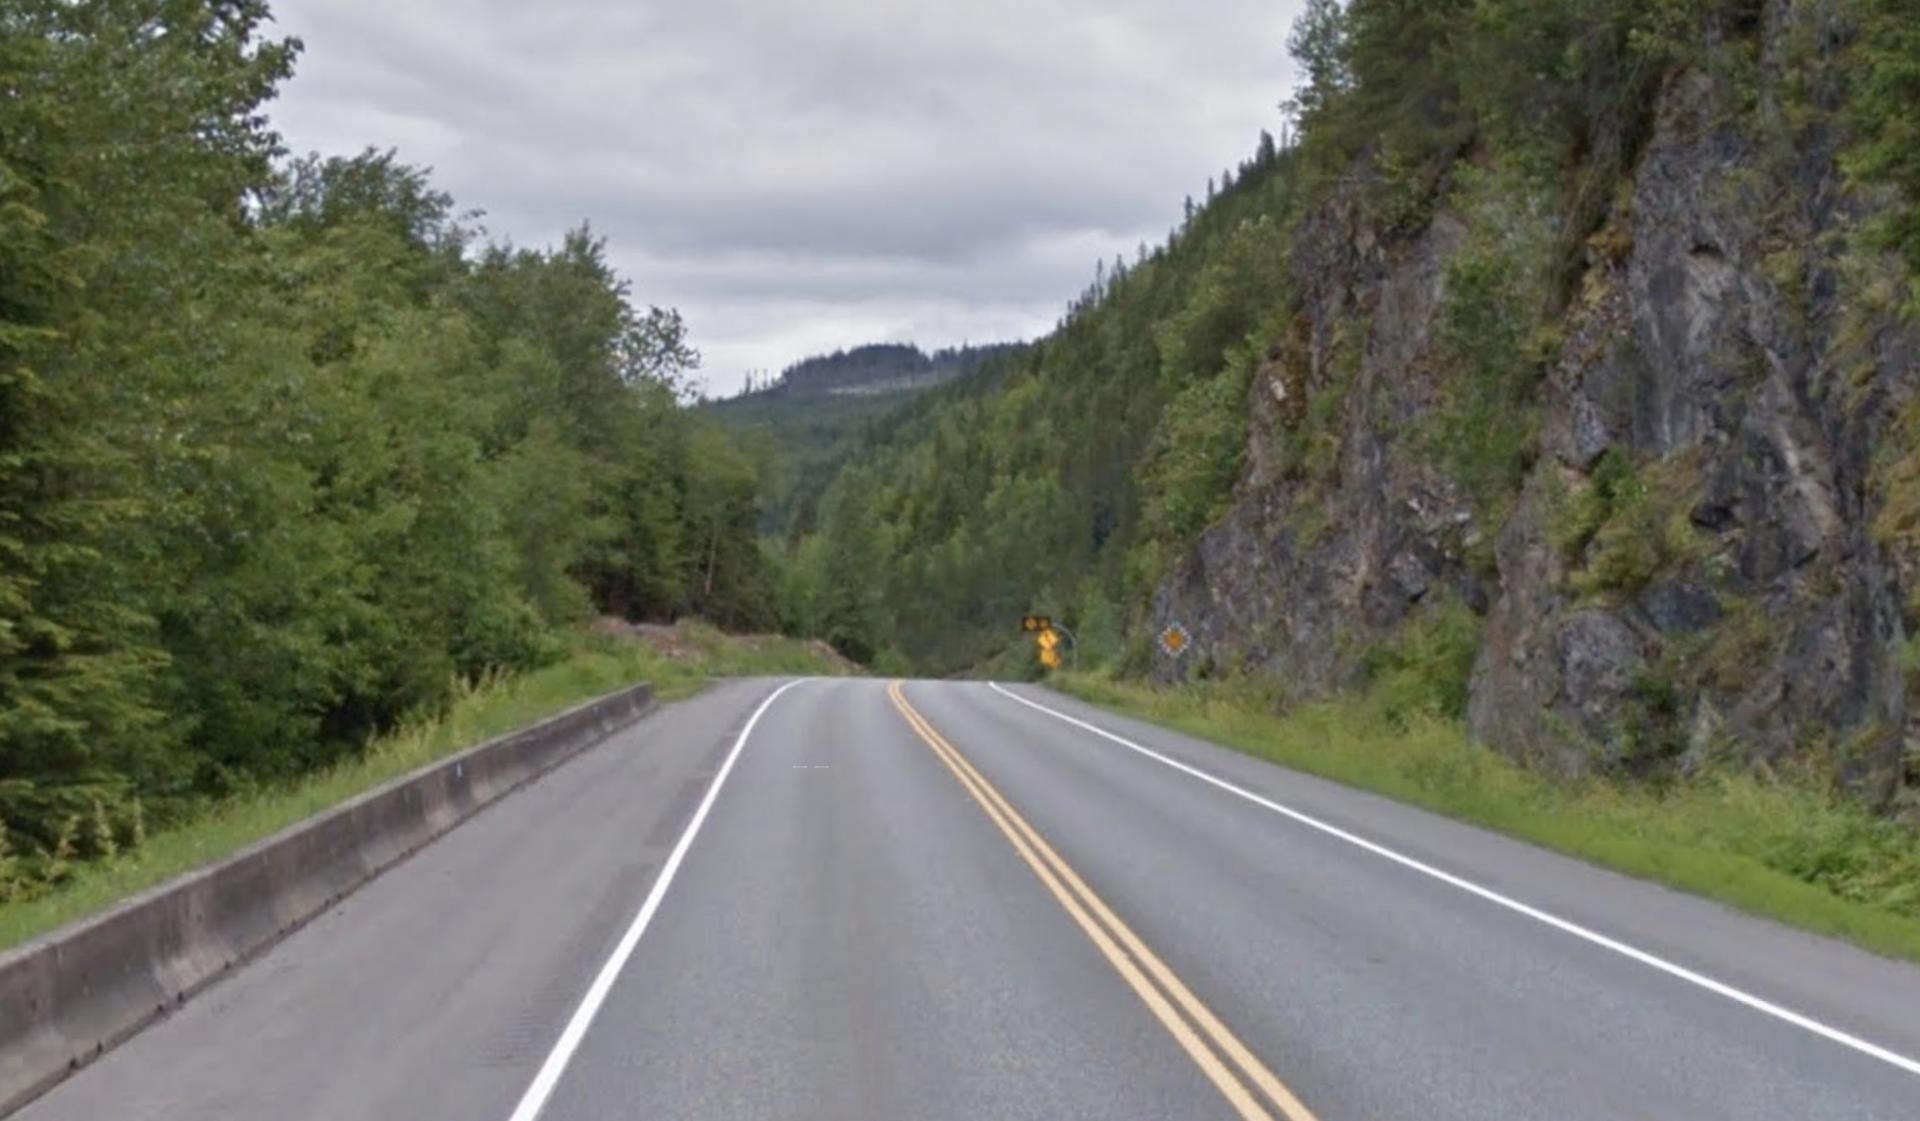 Highway 16, also called the Highway of Tears, in B.C. (Photo: Google Maps)